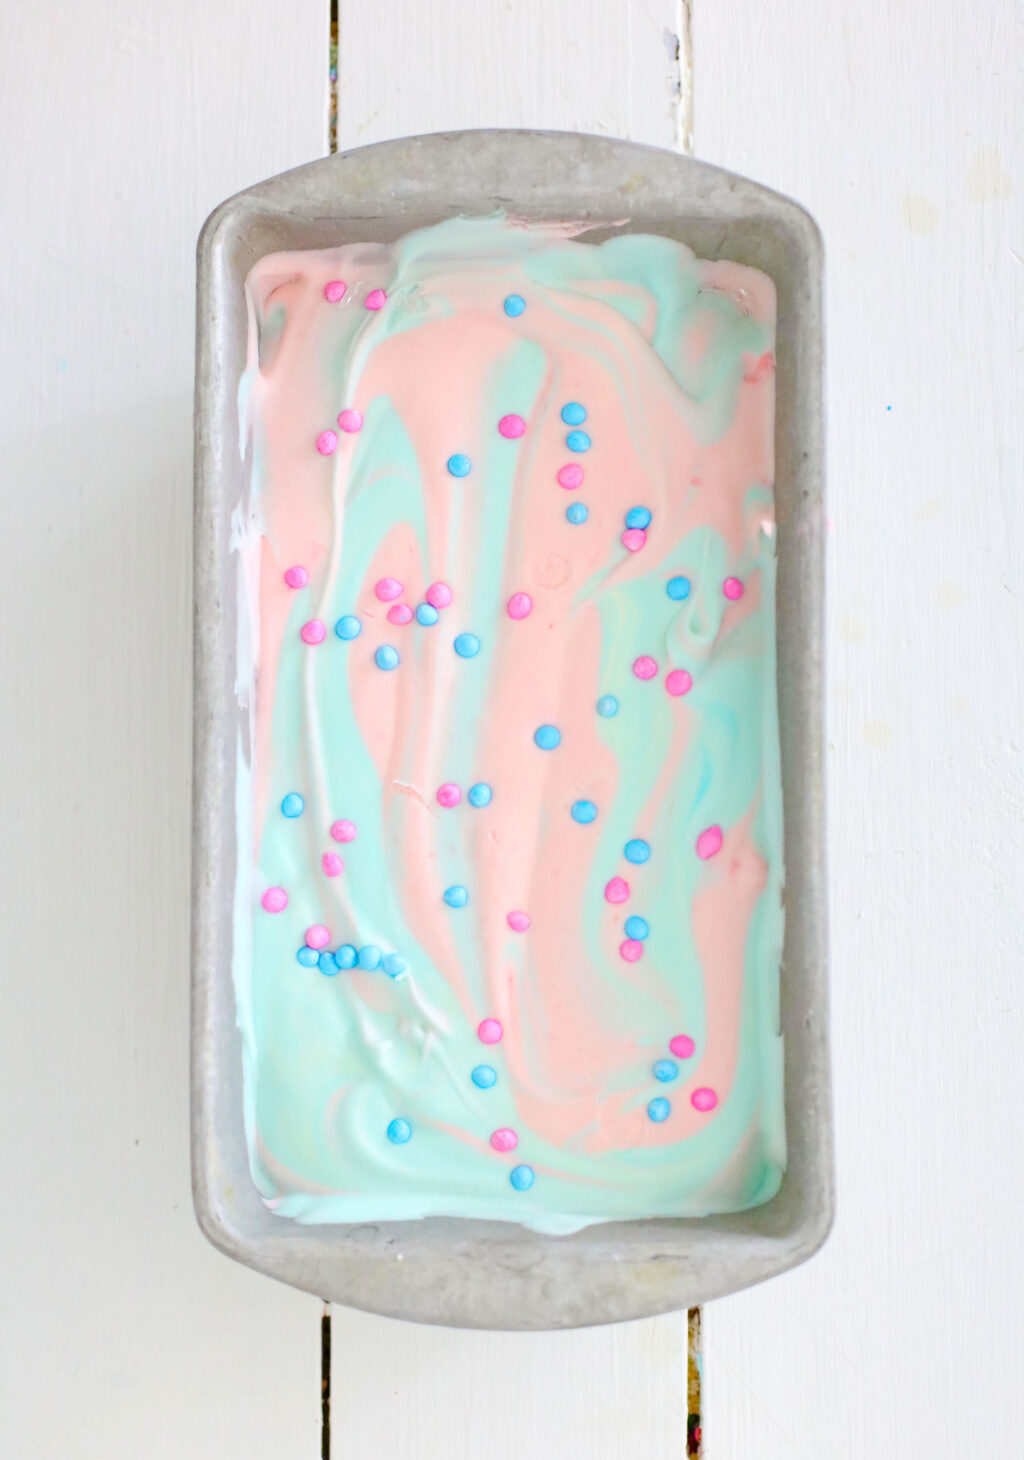 cotton candy ice cream mixture in loaf pan